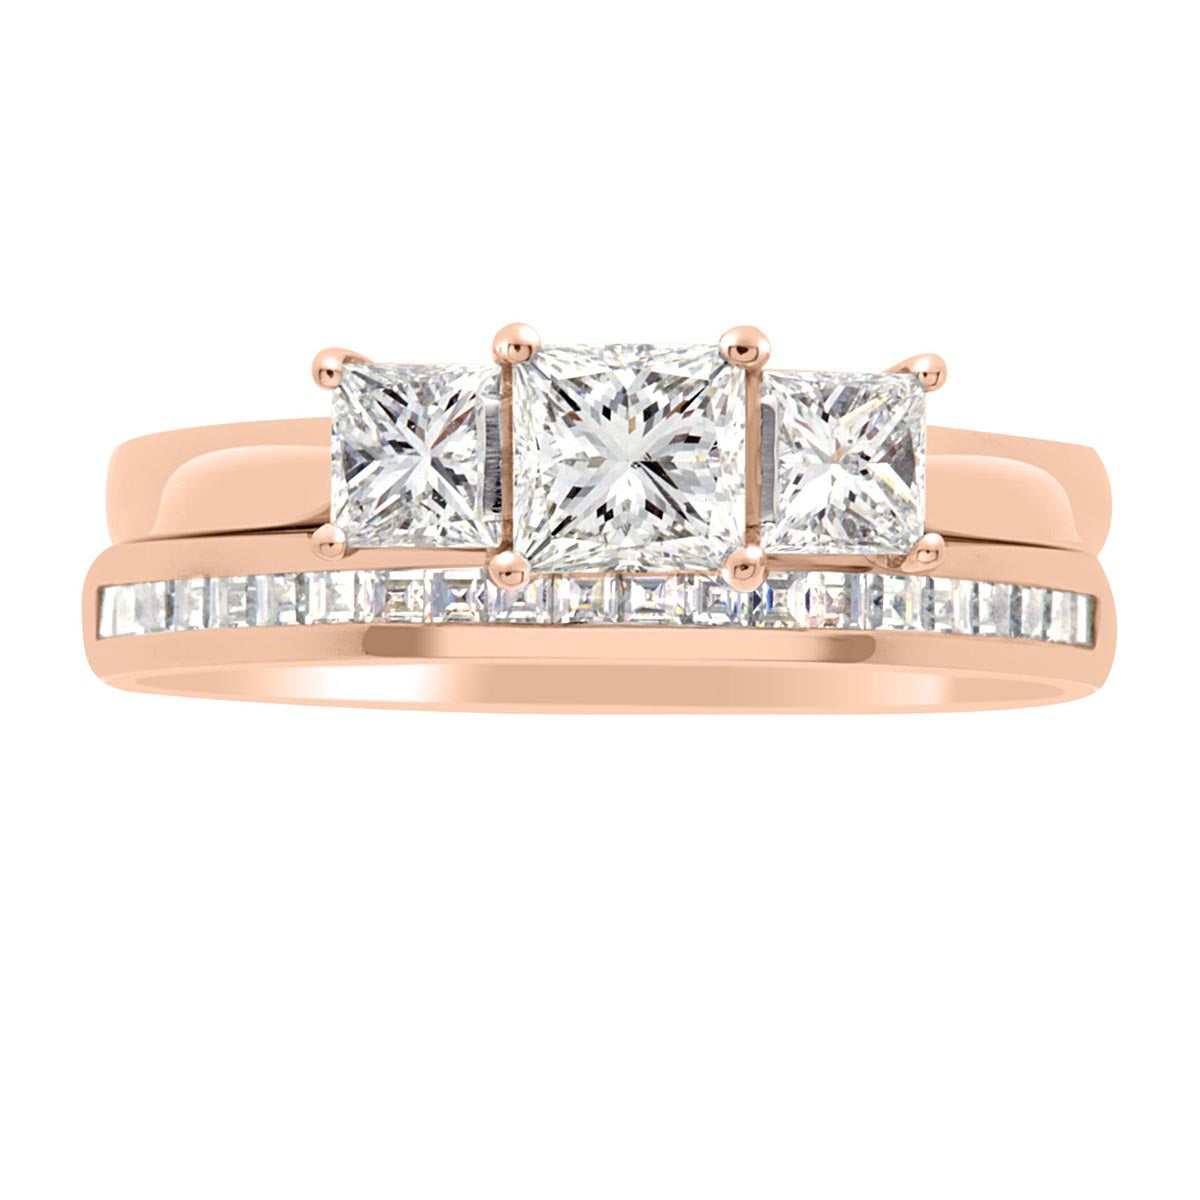 Three Stone Princess Cut Diamond Ring made from rose gold with a matching diamond wedding ring